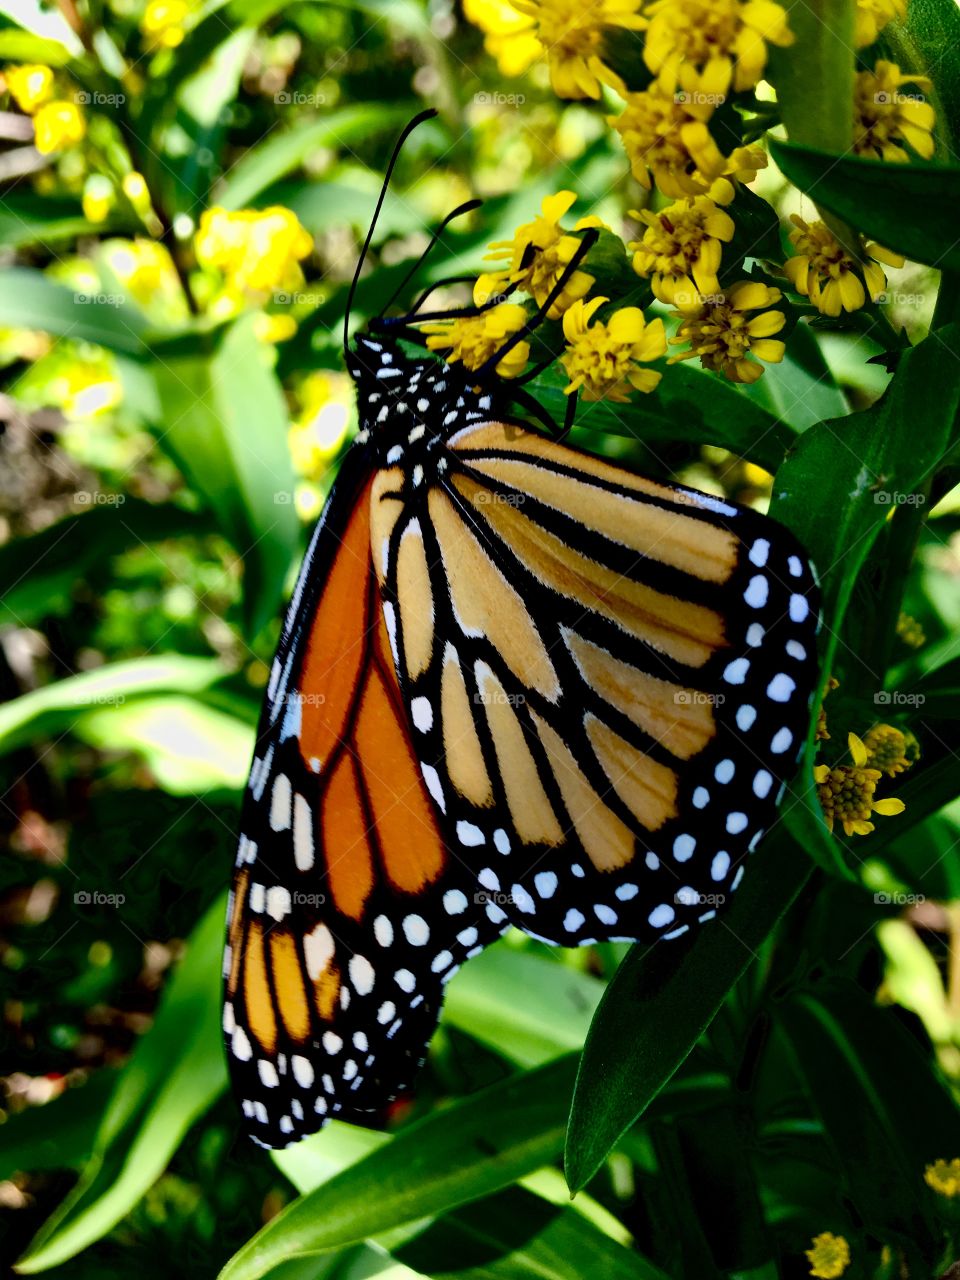 Monarch butterfly at the beach